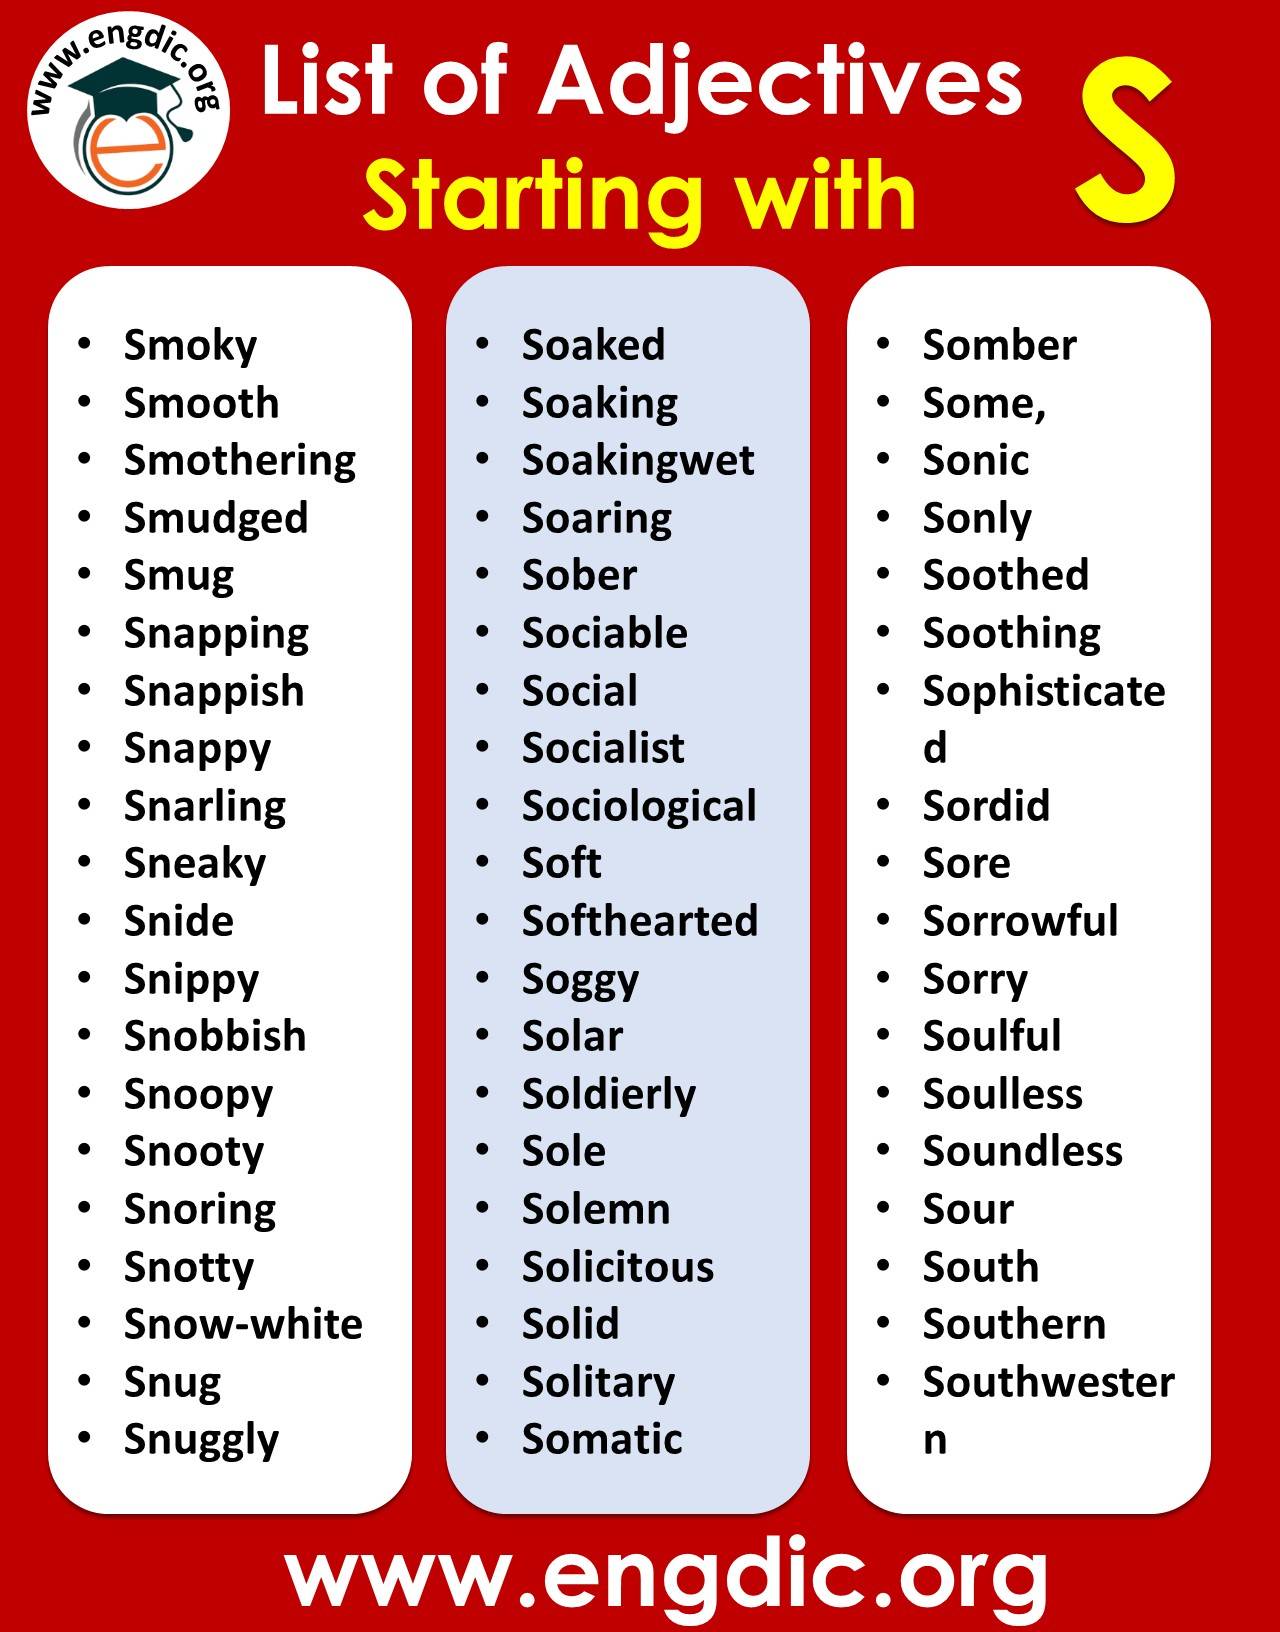 adjectives that start with s to describe a person positively